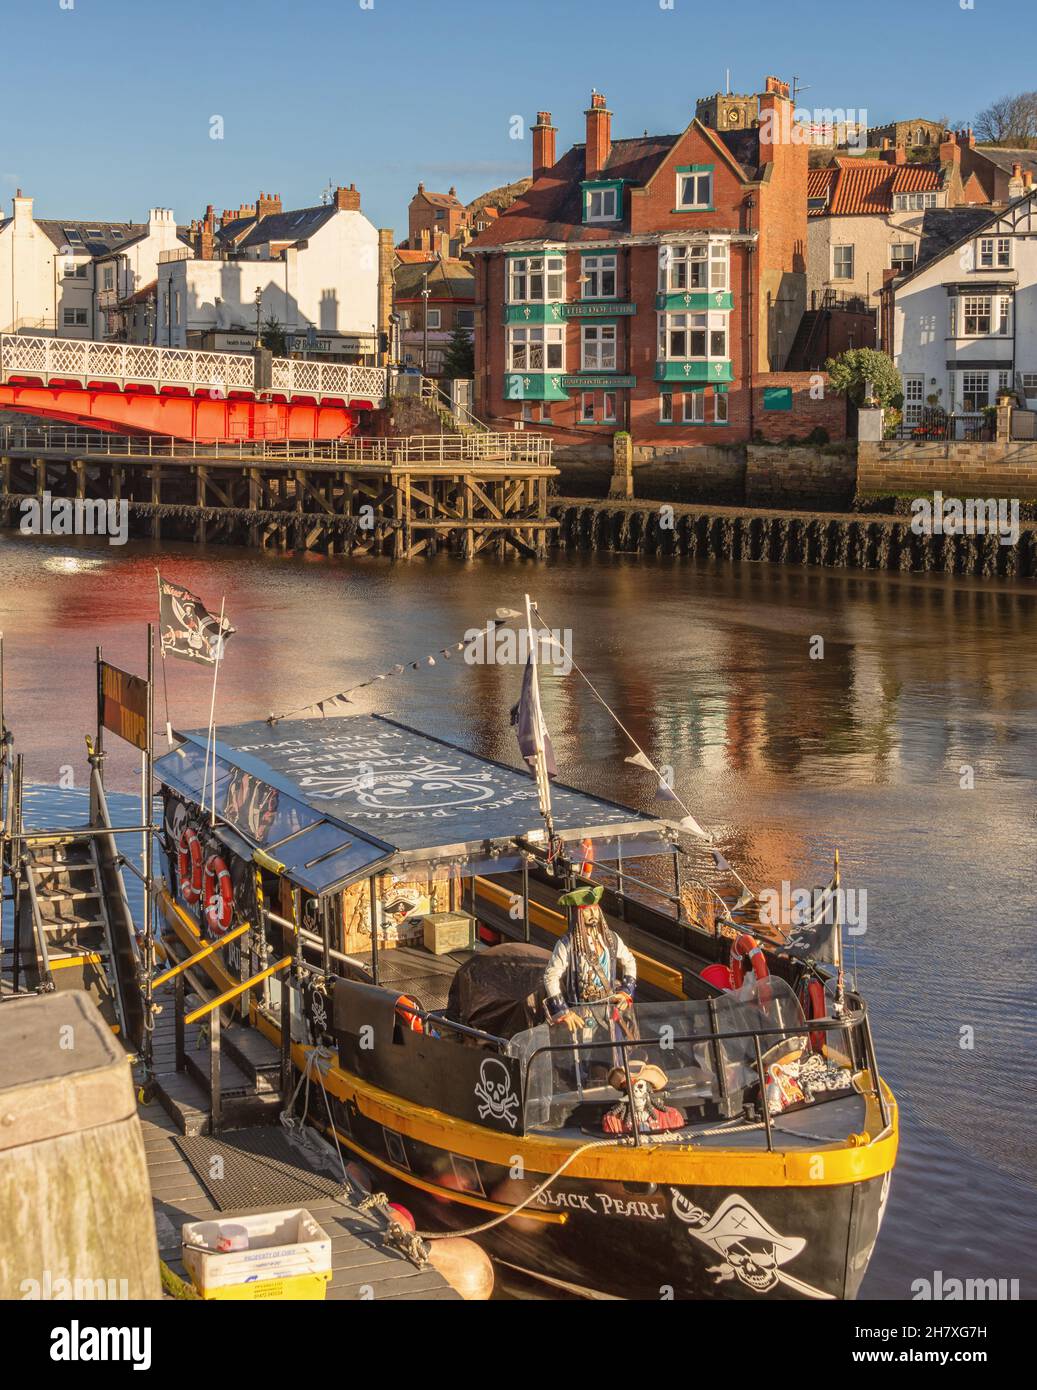 A tour boat on a pirate theme is moored to a quay.  A bridge is in the background and buildings are on the far side of the harbour. A clear sky is abo Stock Photo